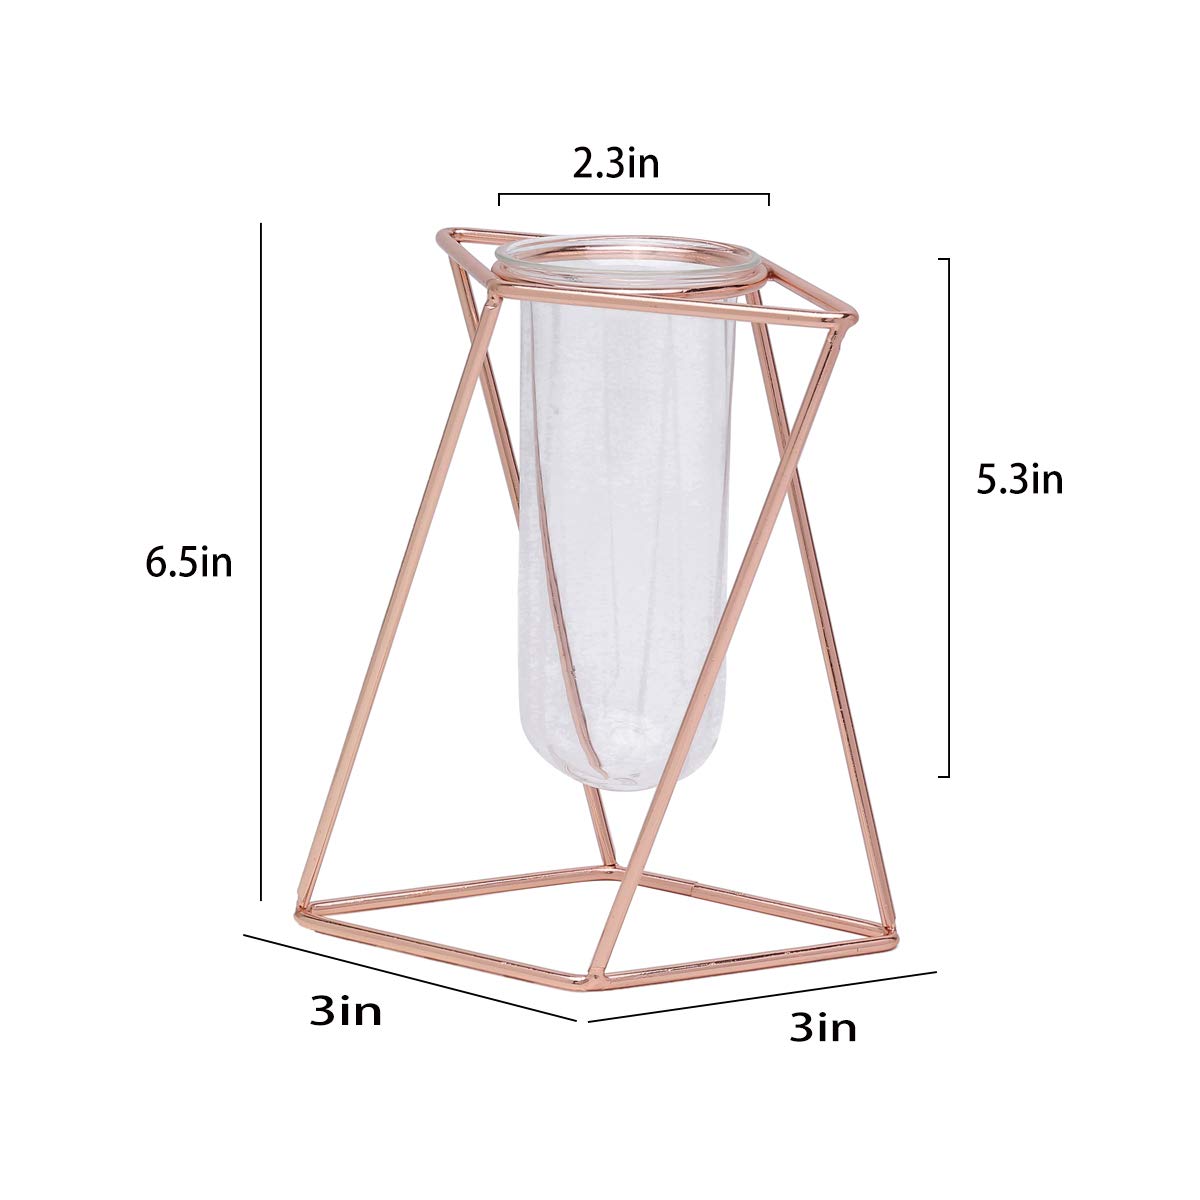 Nordic Ins Triangle Ornament Small Hydroponic Flower Stand Simple Creative Home Decoration Garden Gold Large Metal Vases